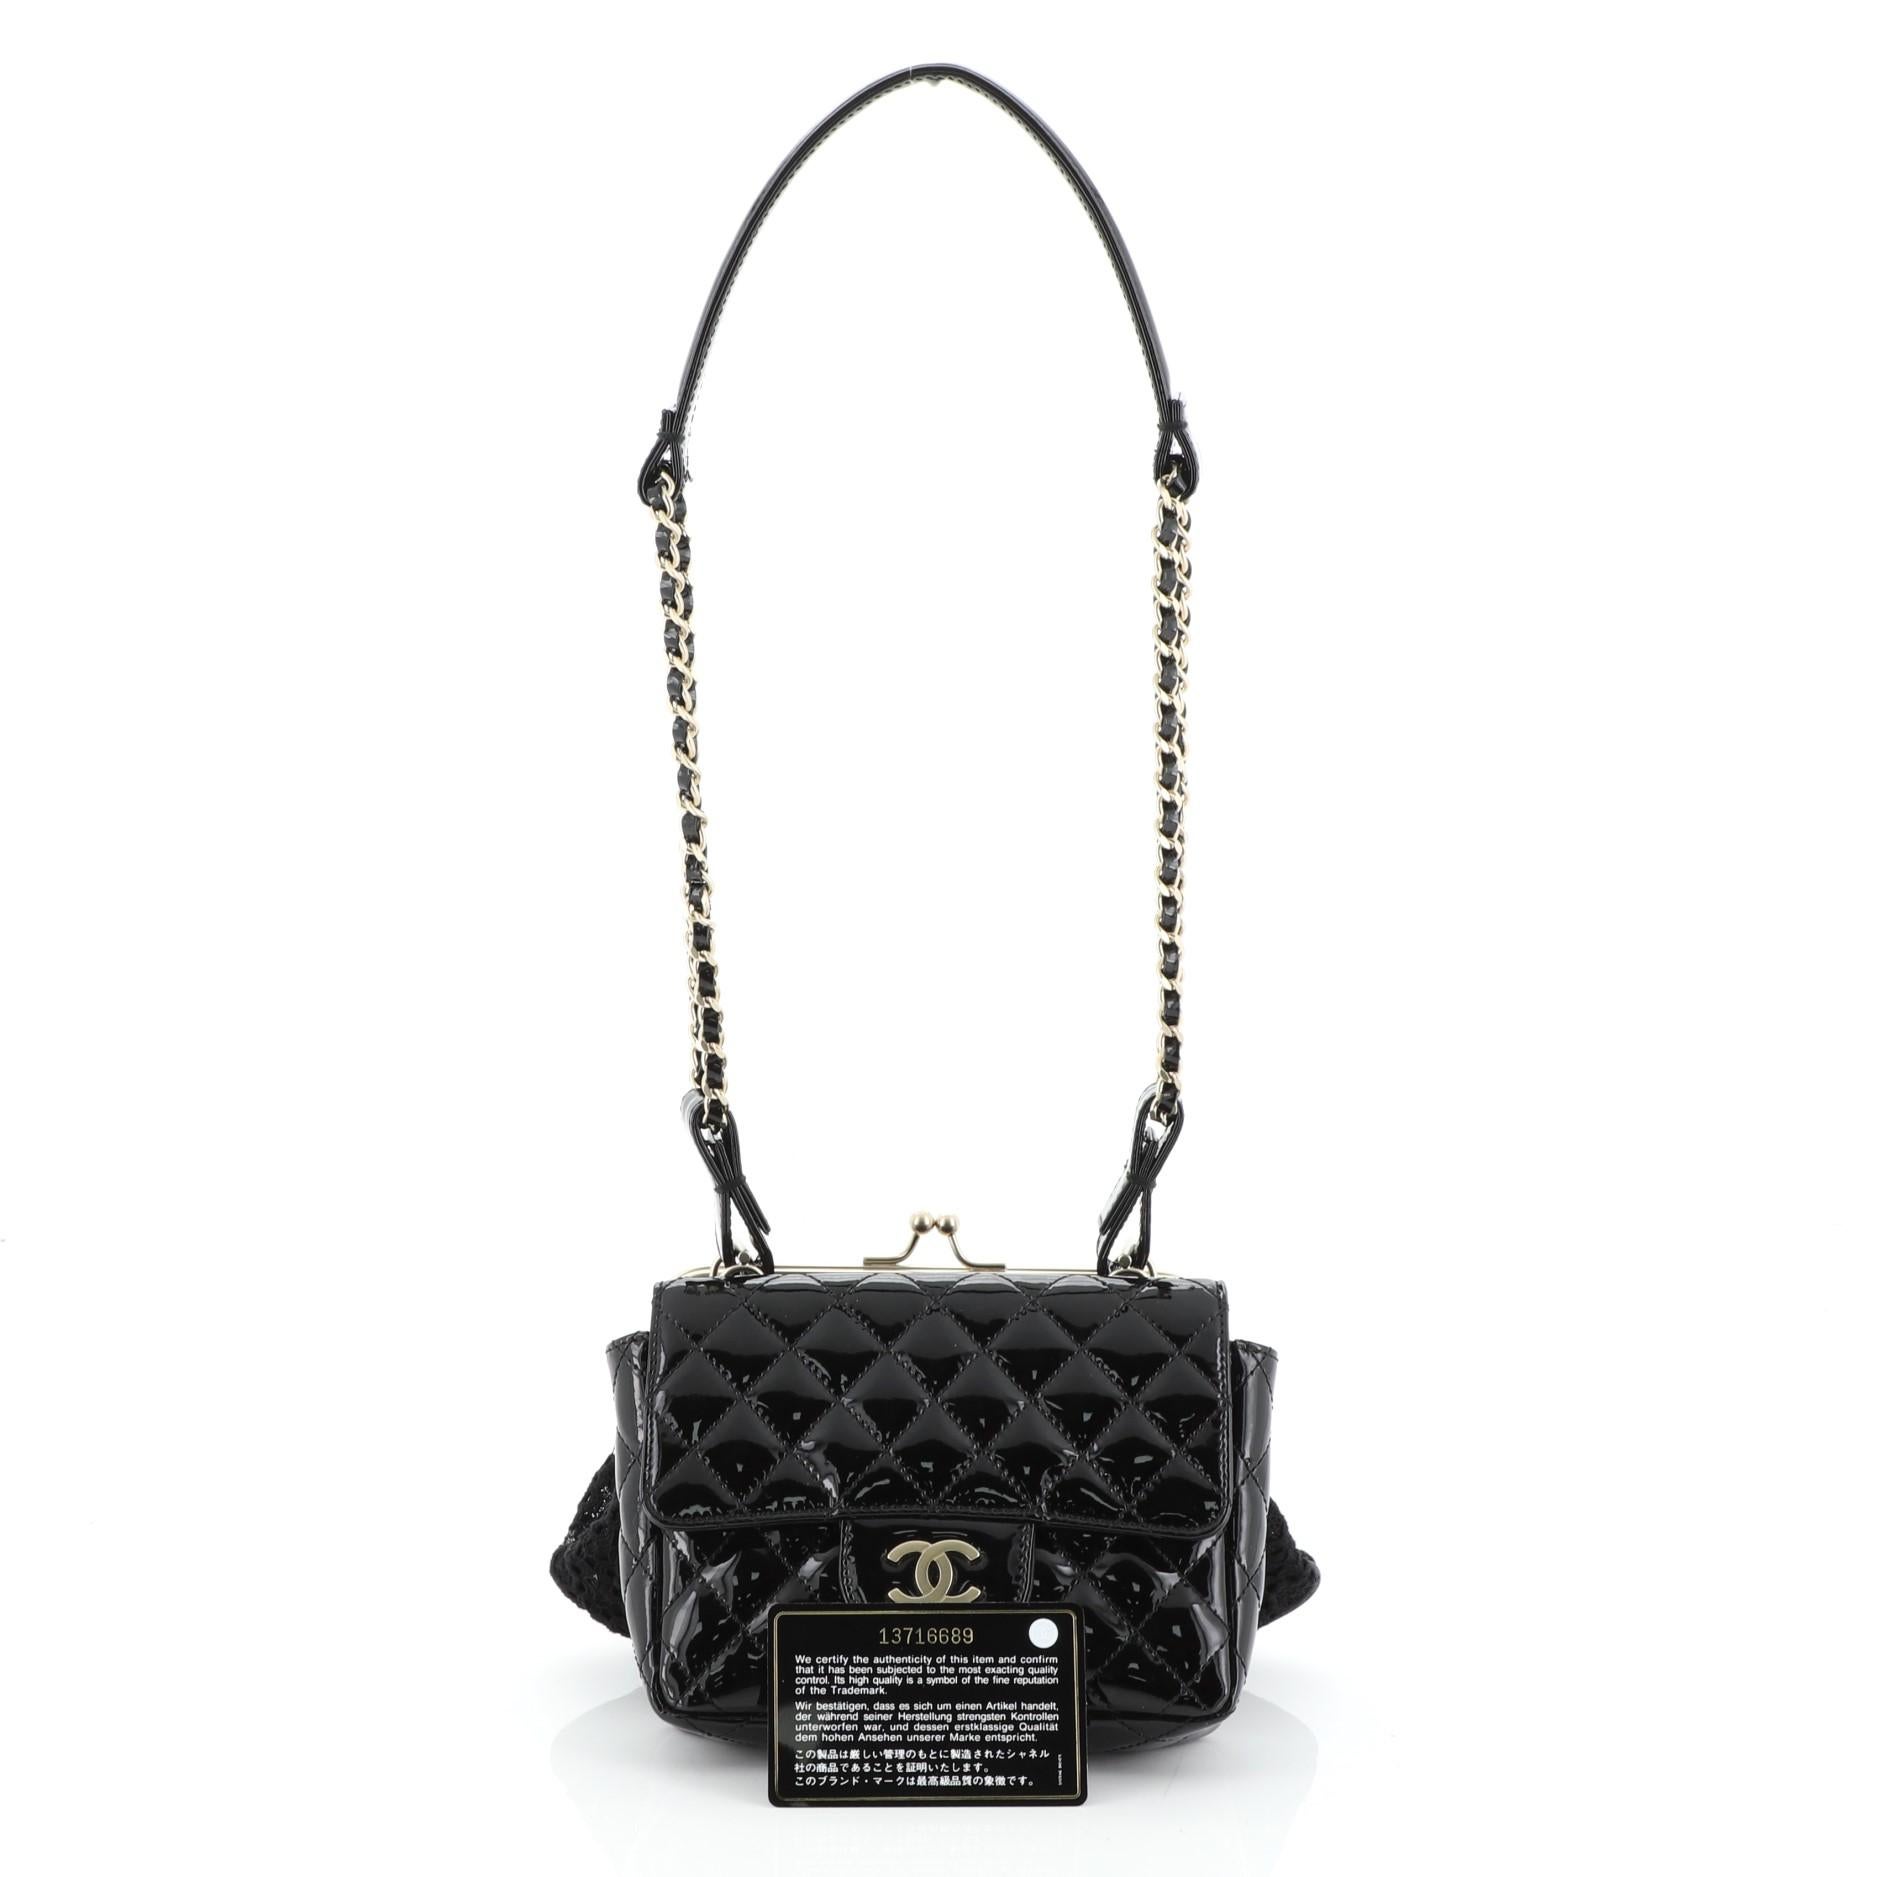 This Chanel Twin Chain Shoulder Bag Quilted Patent and Lace, crafted in black quilted patent leather and fabric, this unique twin bag features a connected flap and framed bag, woven-in leather chain strap with leather shoulder pad and matte